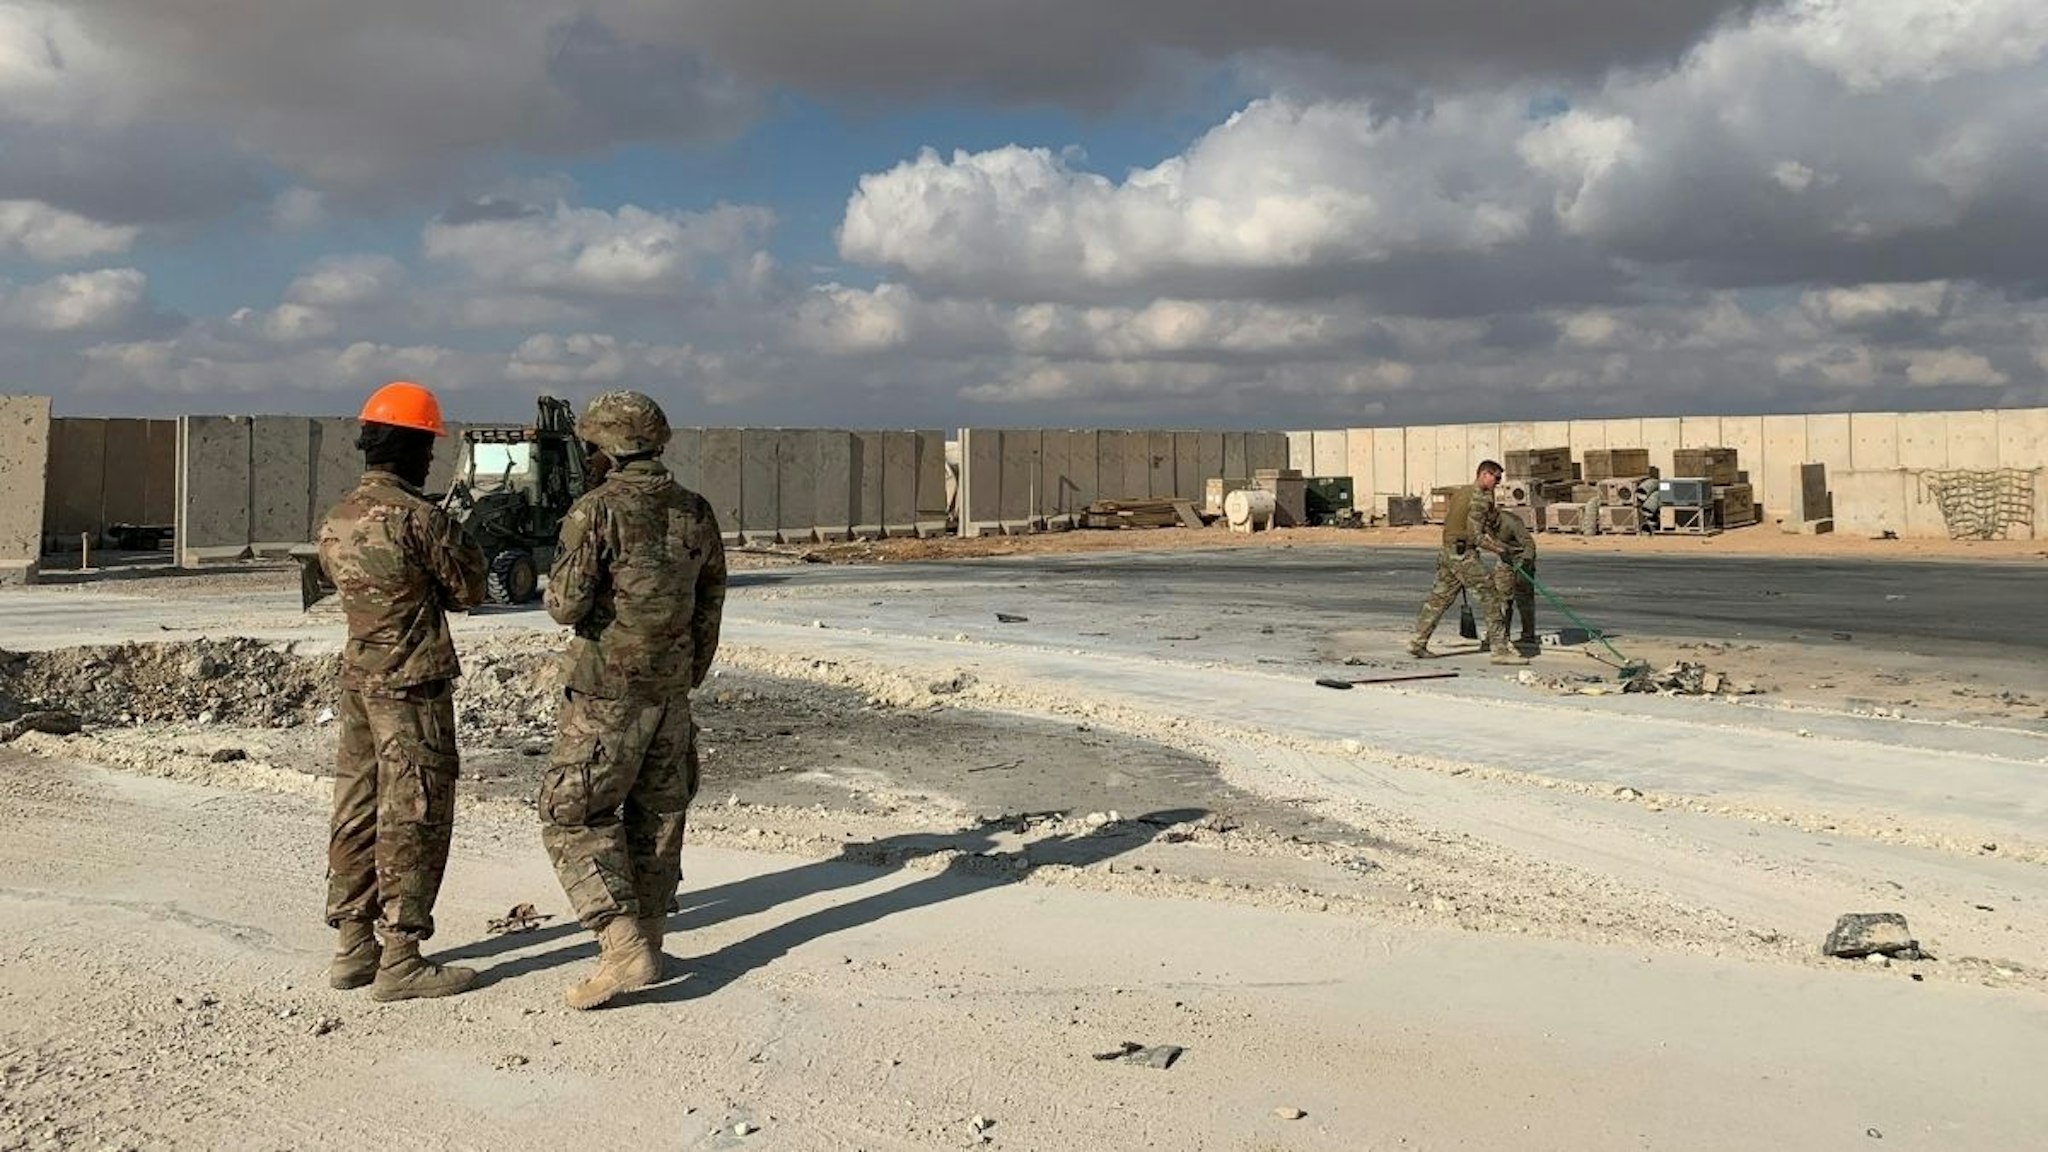 A picture taken on January 13, 2020 during a press tour organised by the US-led coalition fighting the remnants of the Islamic State group, shows US soldiers clearing rubble at Ain al-Asad military airbase in the western Iraqi province of Anbar.